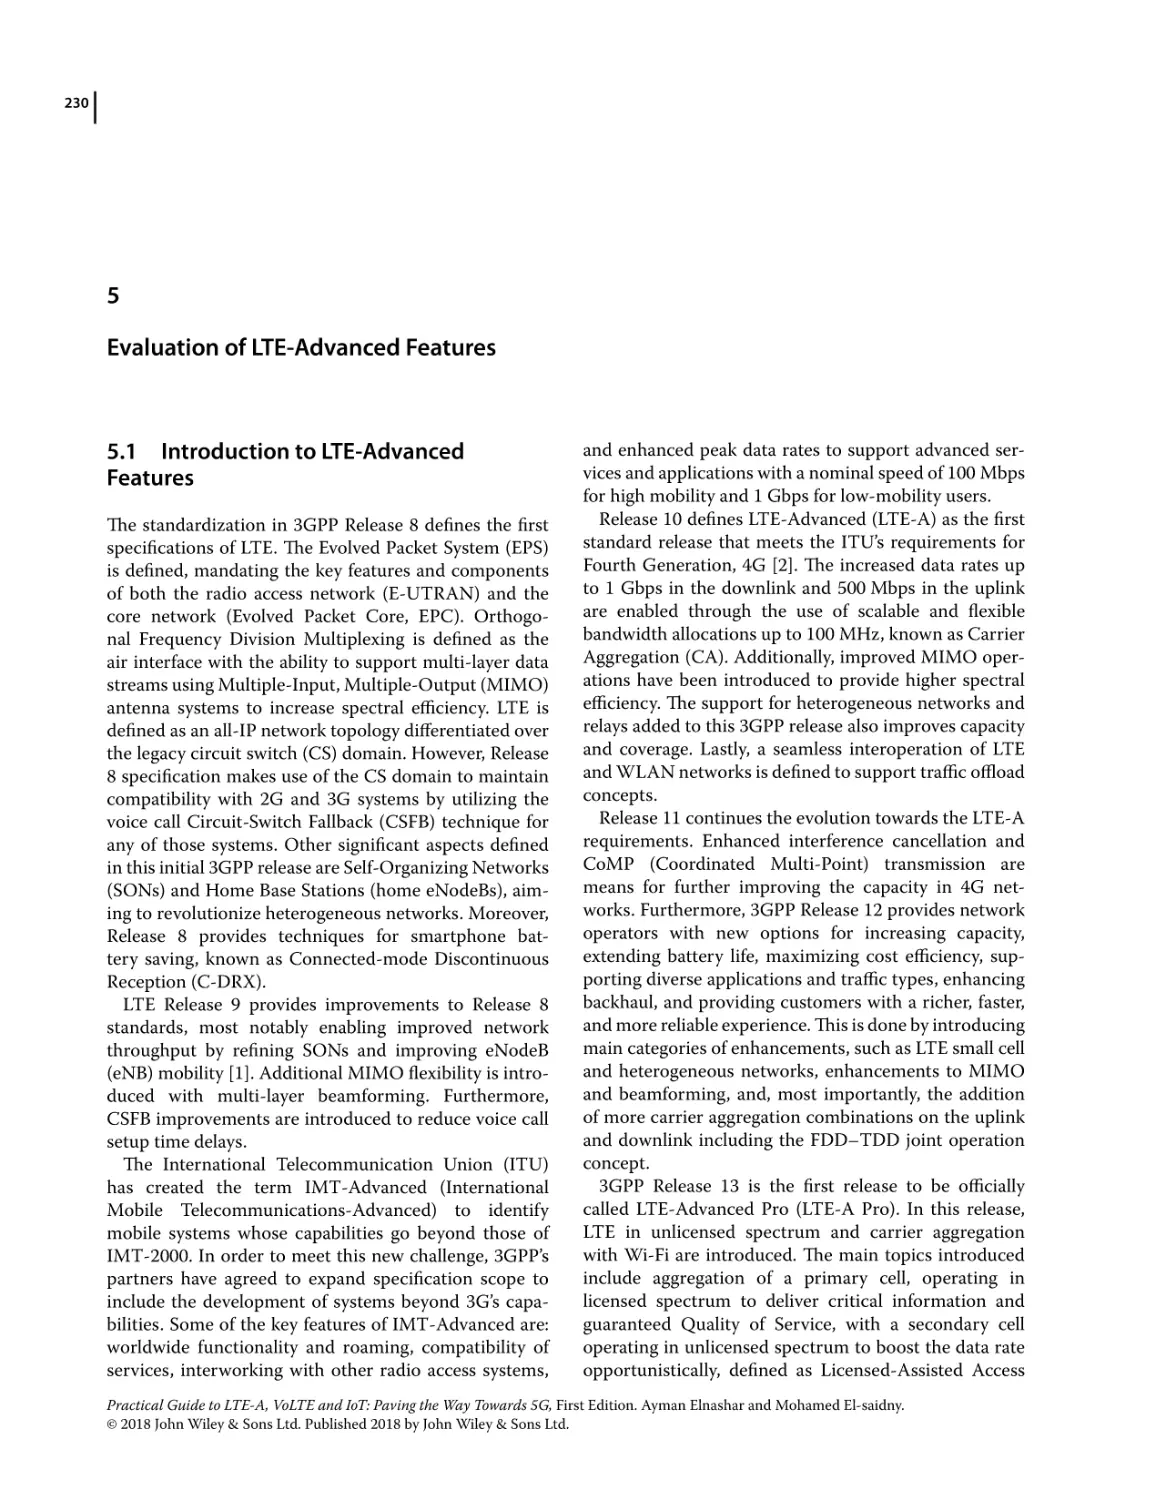 Chapter 5 Evaluation of LTE‐Advanced Features
5.1 Introduction to LTE‐Advanced Features